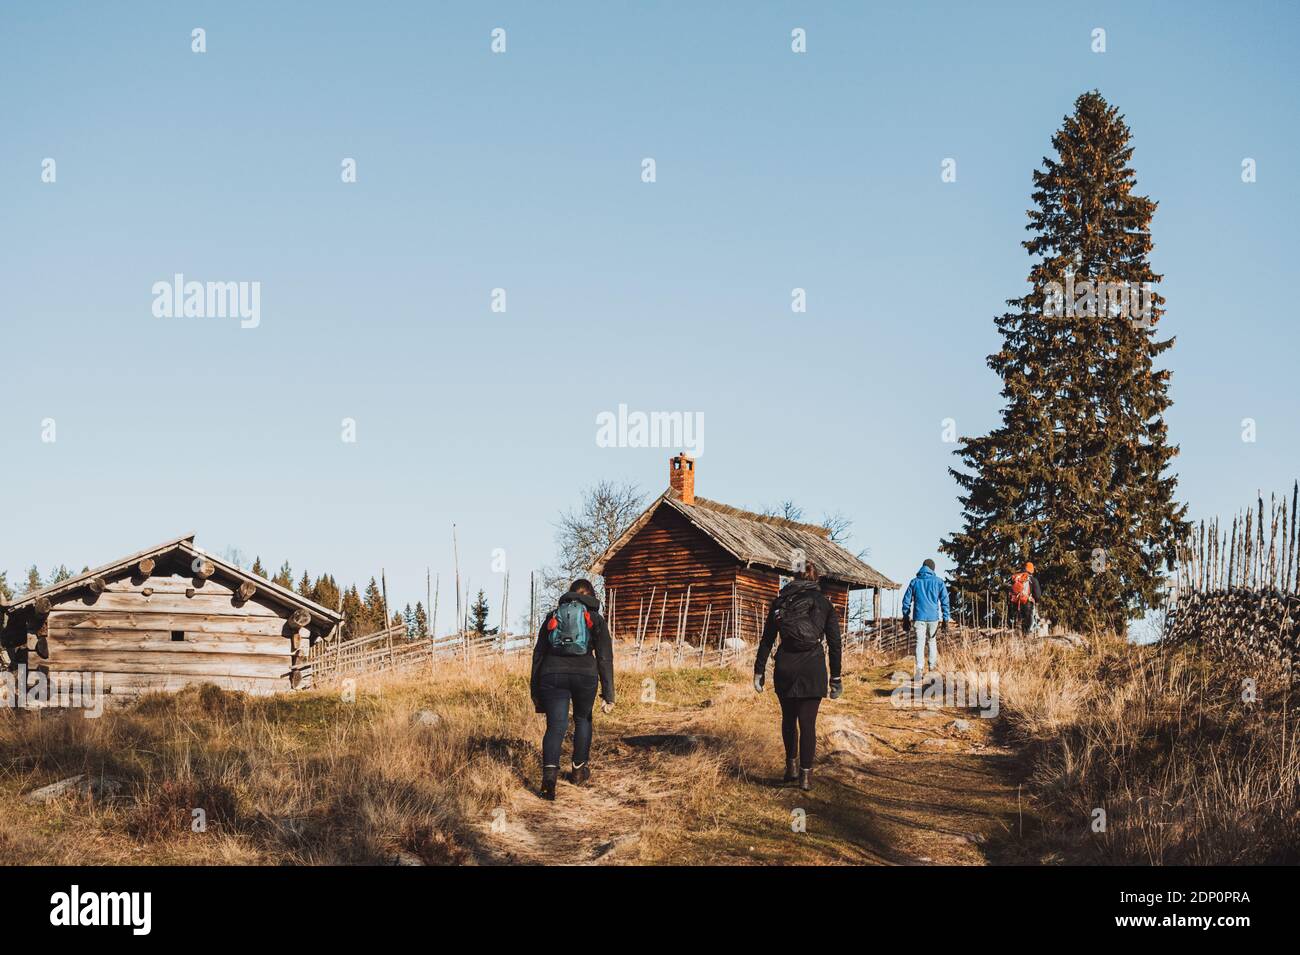 People hiking towards wooden cottages Stock Photo